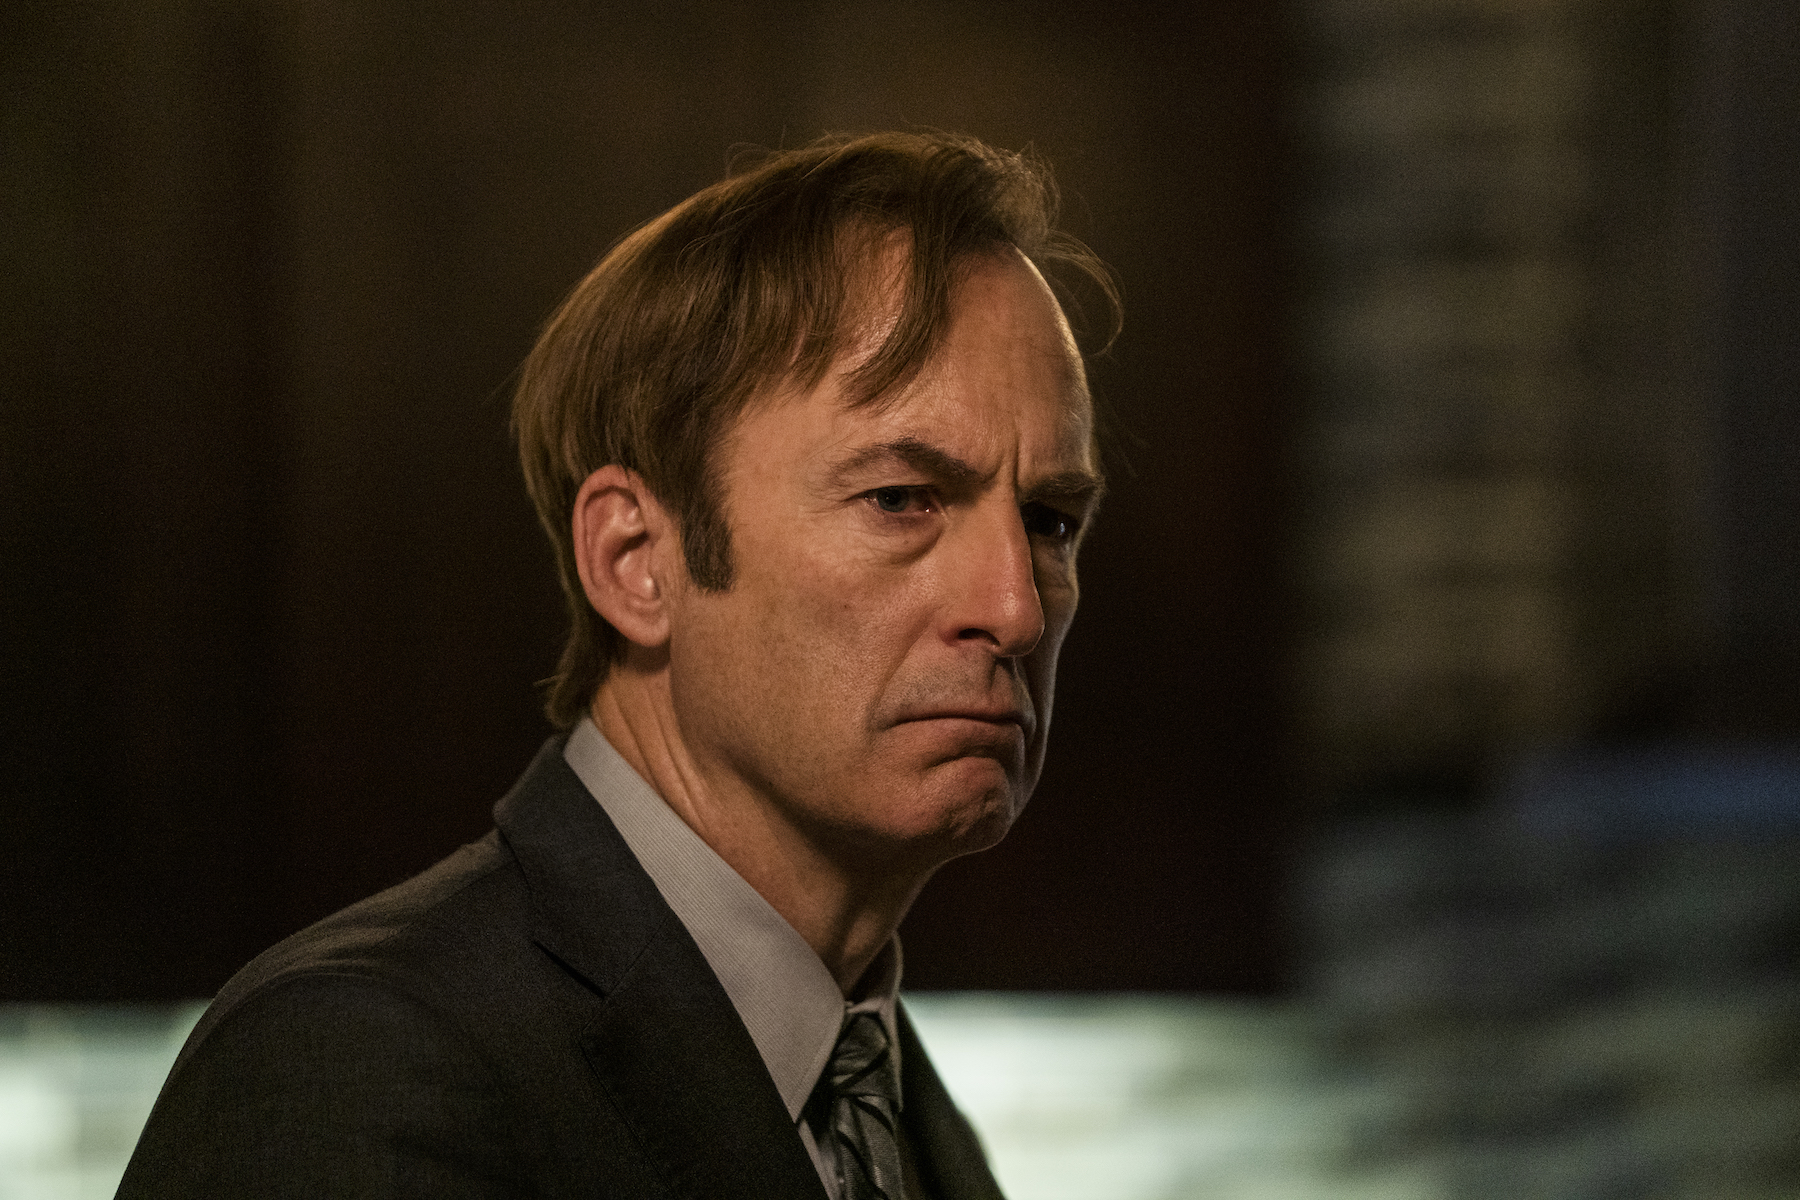 Bob Odenkirk as Saul Goodman - Better Call Saul _ Season 6, Episode 9 - Photo Credit: Greg Lewis/AMC/Sony Pictures Television